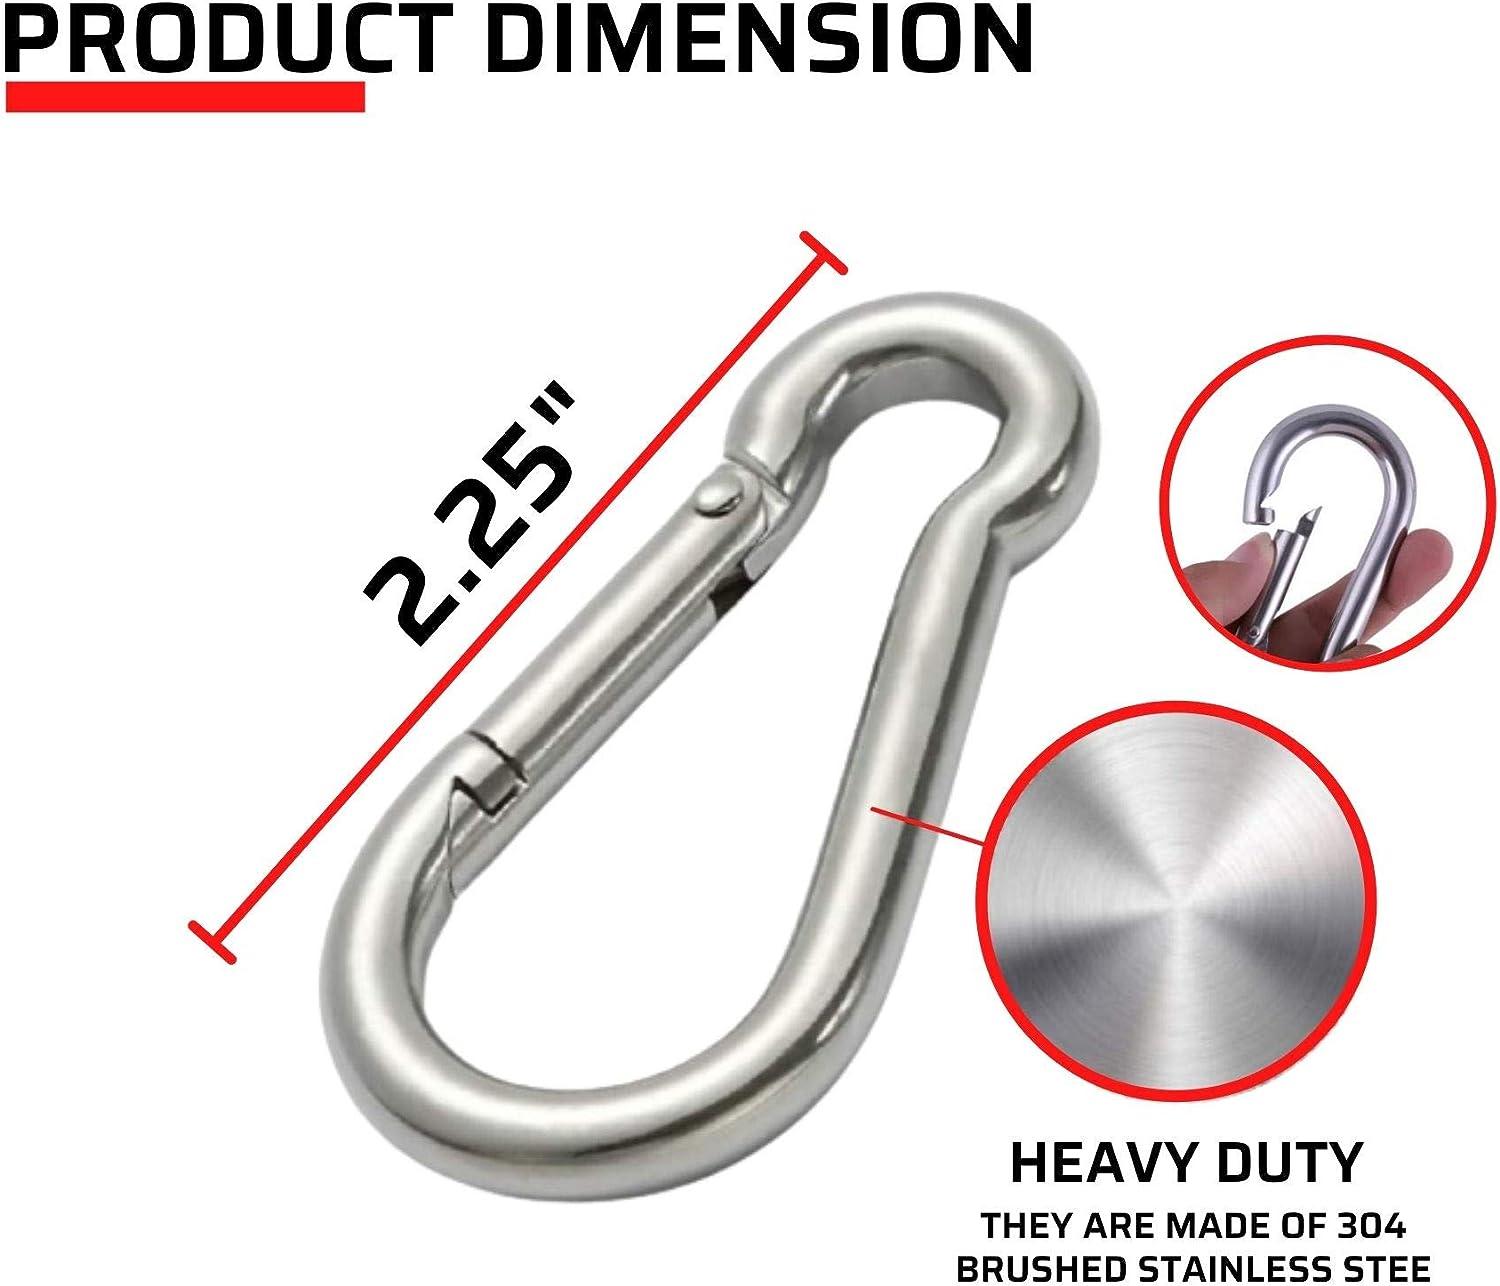 6 Pack of 2 1/4 Inches Stainless Steel Safety Spring Snap Hook Carabiner,  Multi-Purpose Heavy Duty Stainless Steel Carabiner Clips for Keys Swing Set  Camping Fishing Hiking Traveling